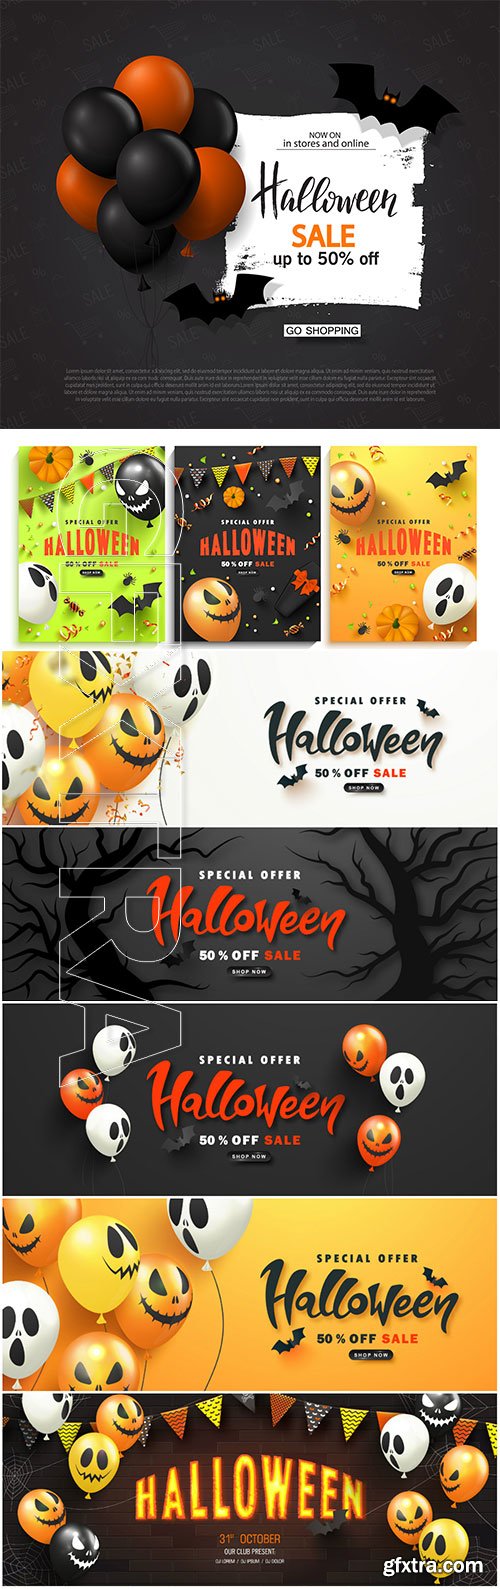 Halloween vector poster with scary balloons and paper bats